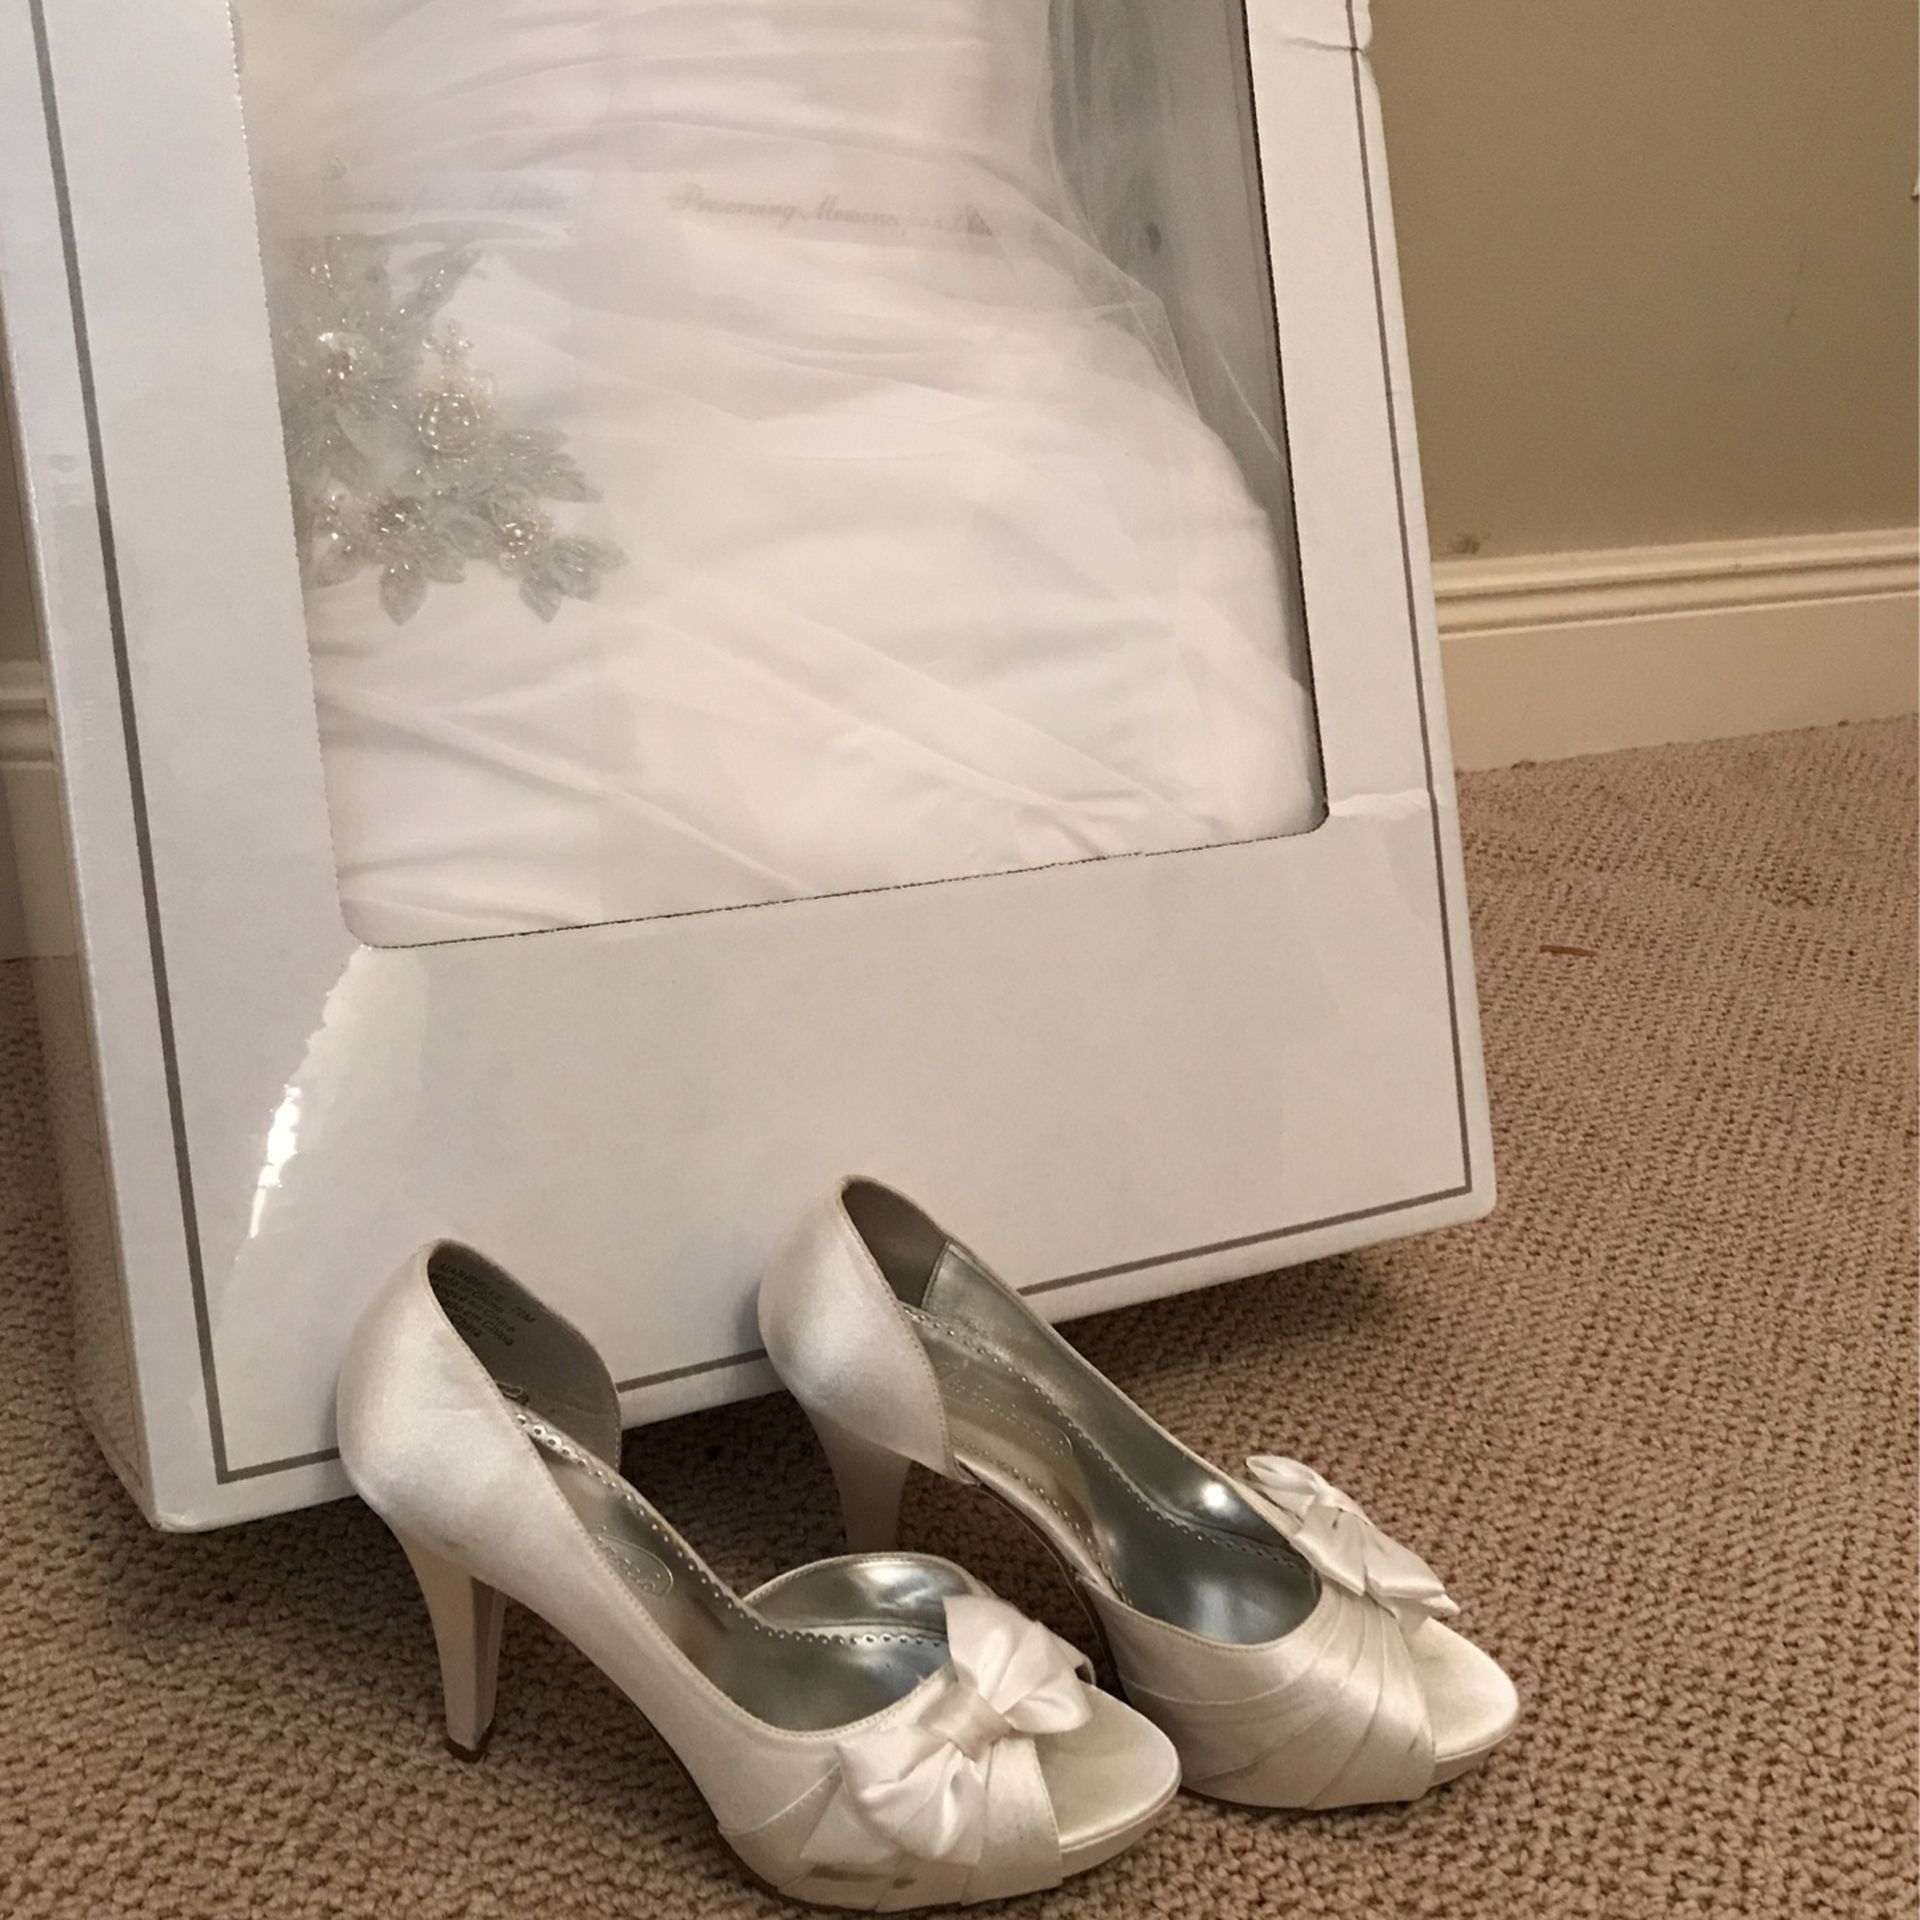 Wedding dress shoes and veil   Medium size From David bridal shoe size 7 1/2 dress will have to open and see